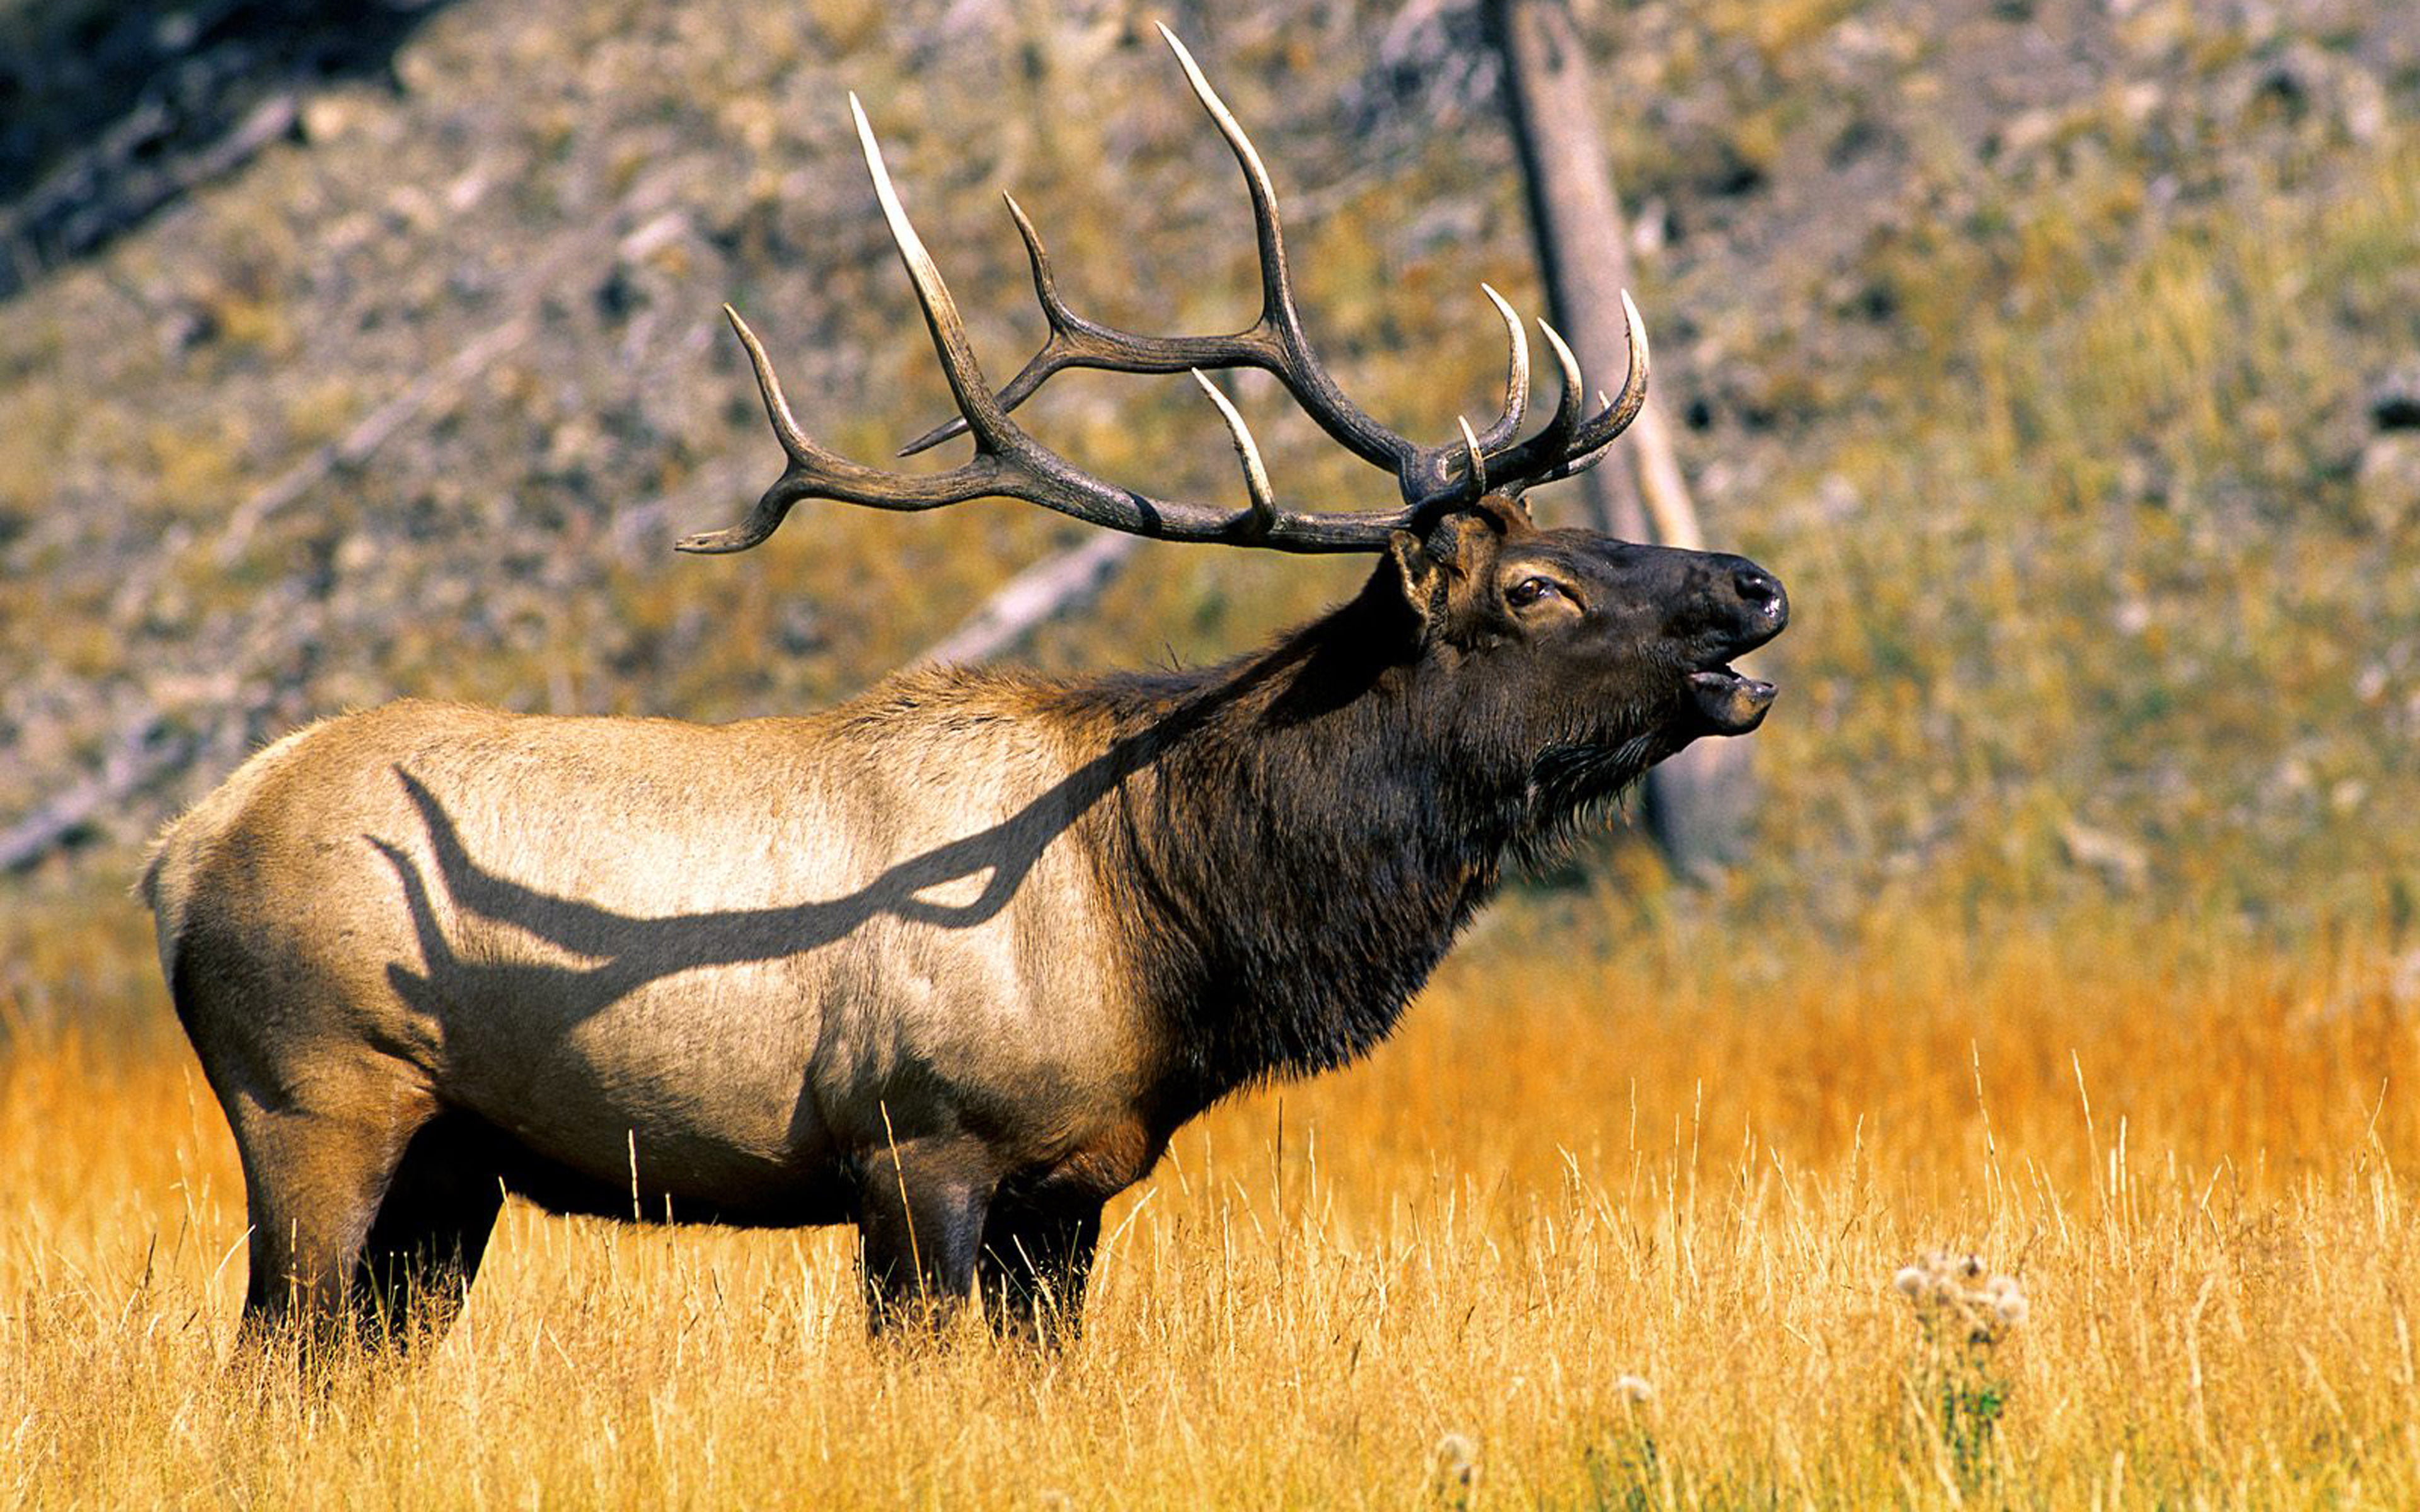 Animal Elk In Yellowstone National Park Wyoming U.s. State Of The Art Hd Wallpapers For Desktop Mobile Phones And Laptop 3840×2400